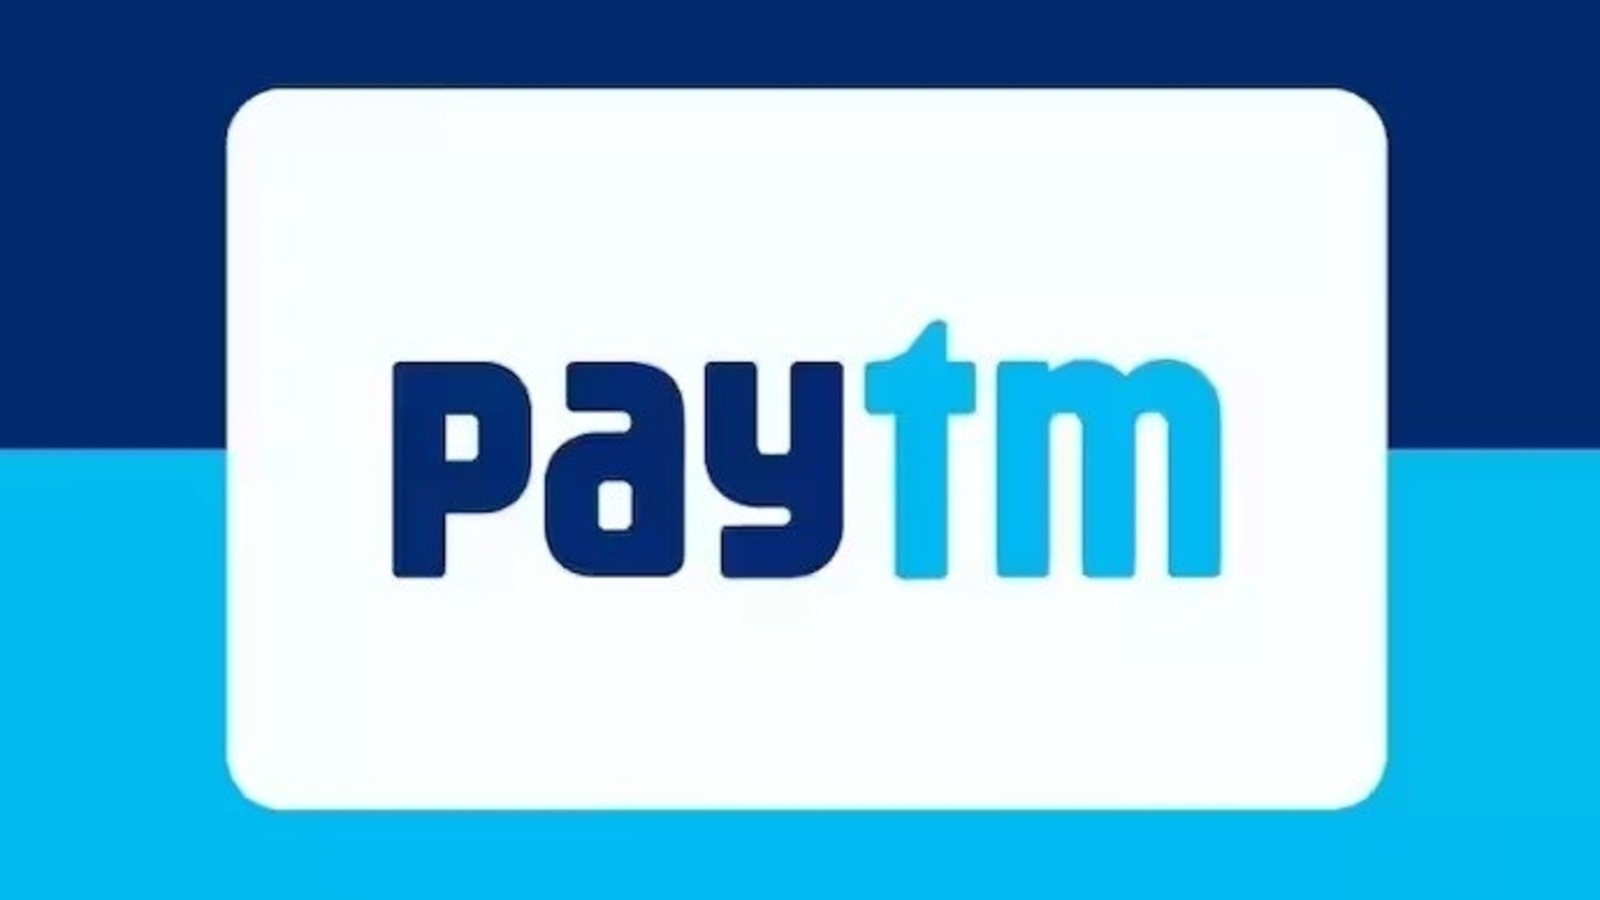 Paytm Payments Services appoints S.R. Batliboi & Associates as its auditor